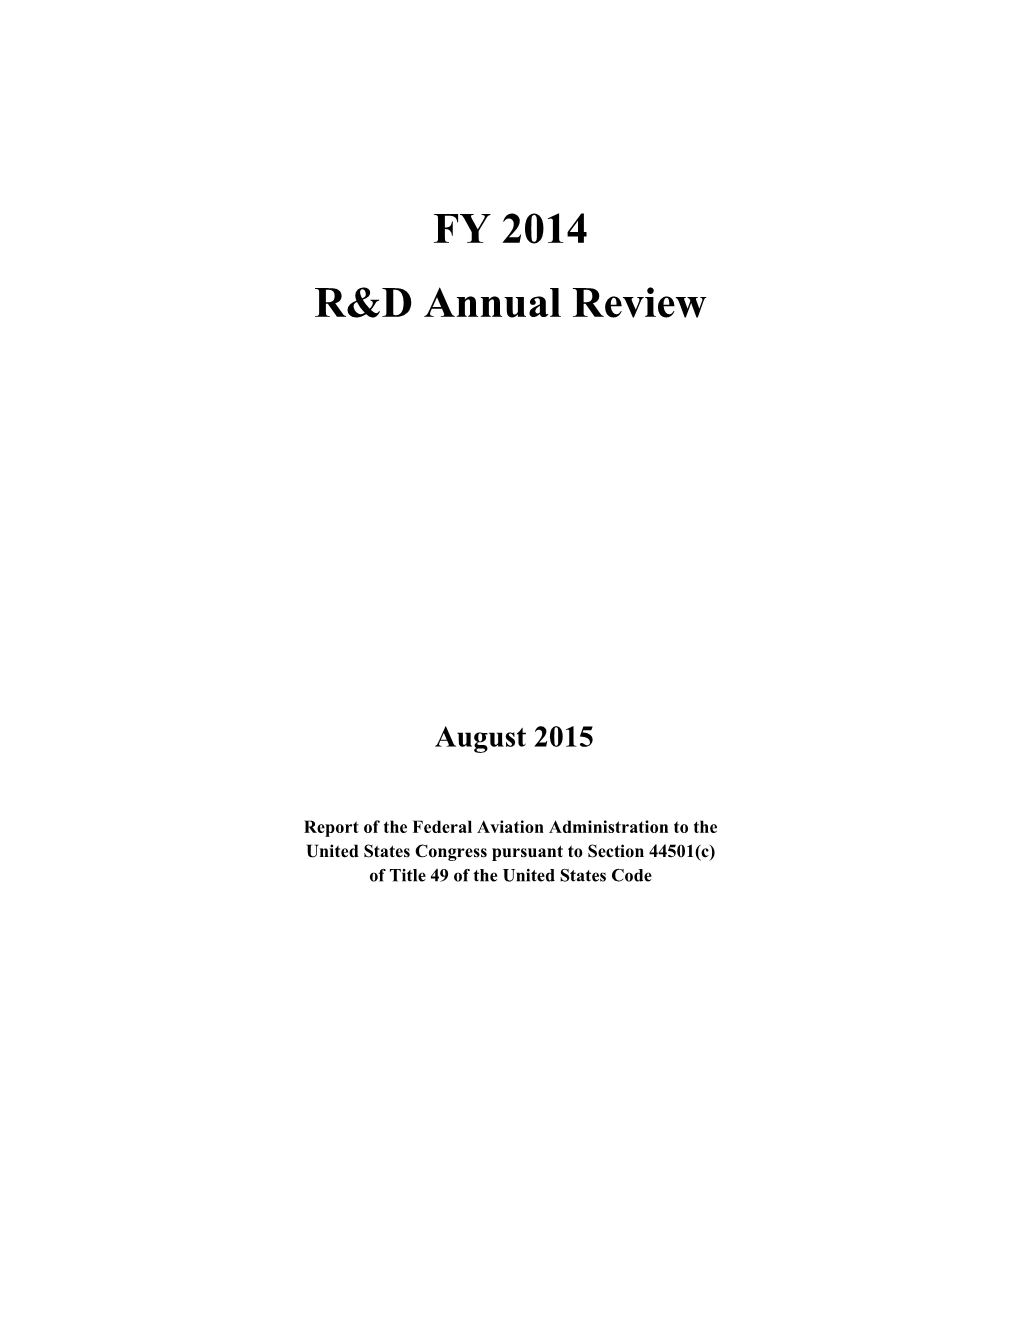 FY 2014 R&D Annual Review